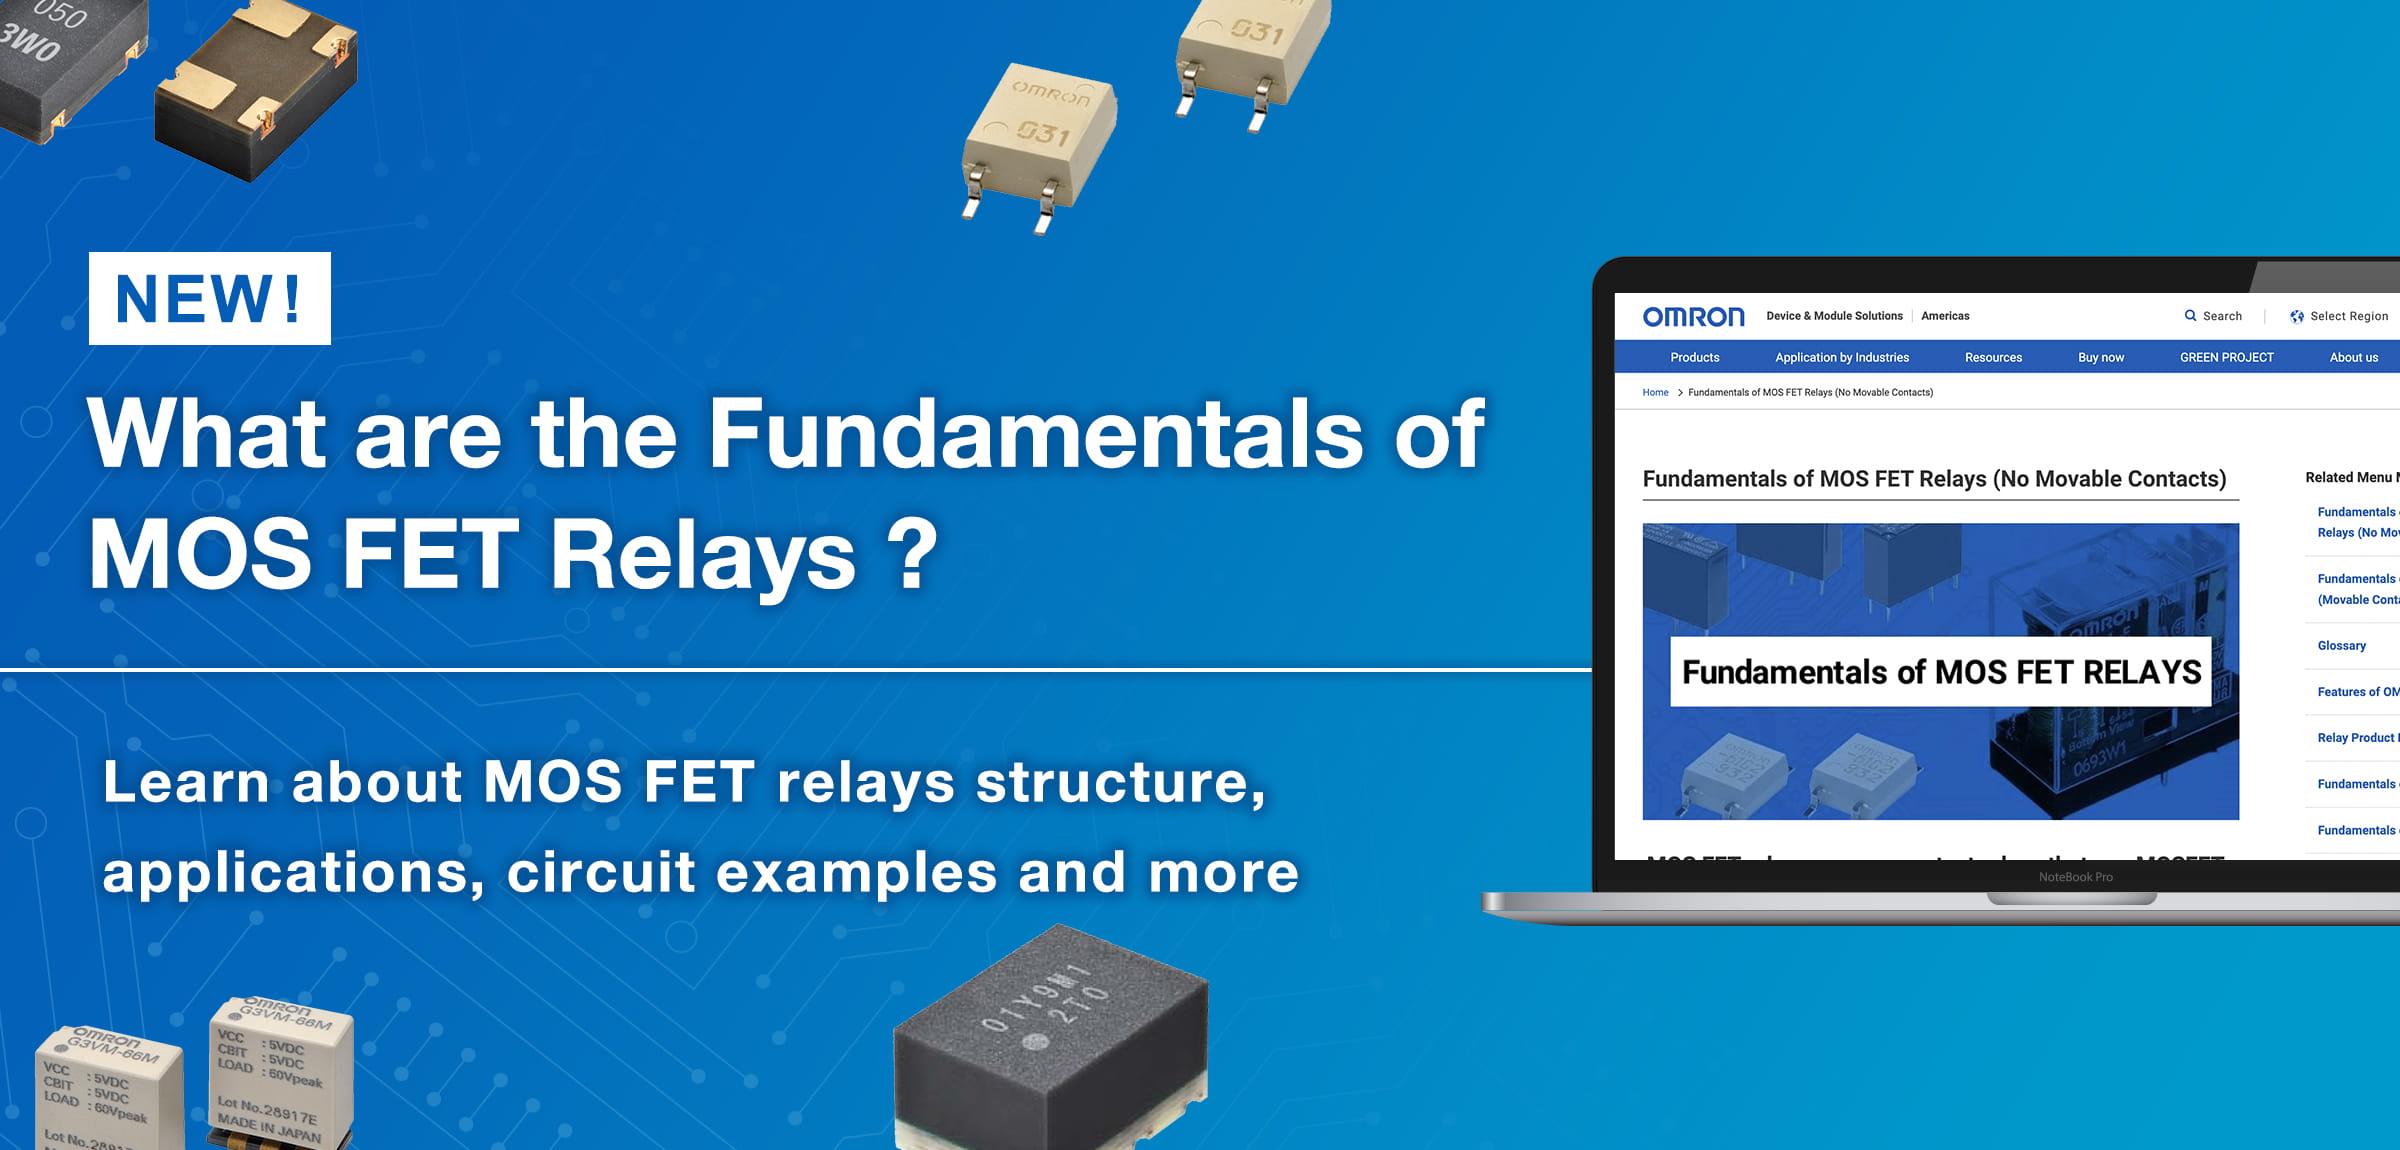 What are the Fundamentals of MOS FET Relays( No Movable Contacts)? Learn about MOS FET relays structure, applications, circuit examples and more